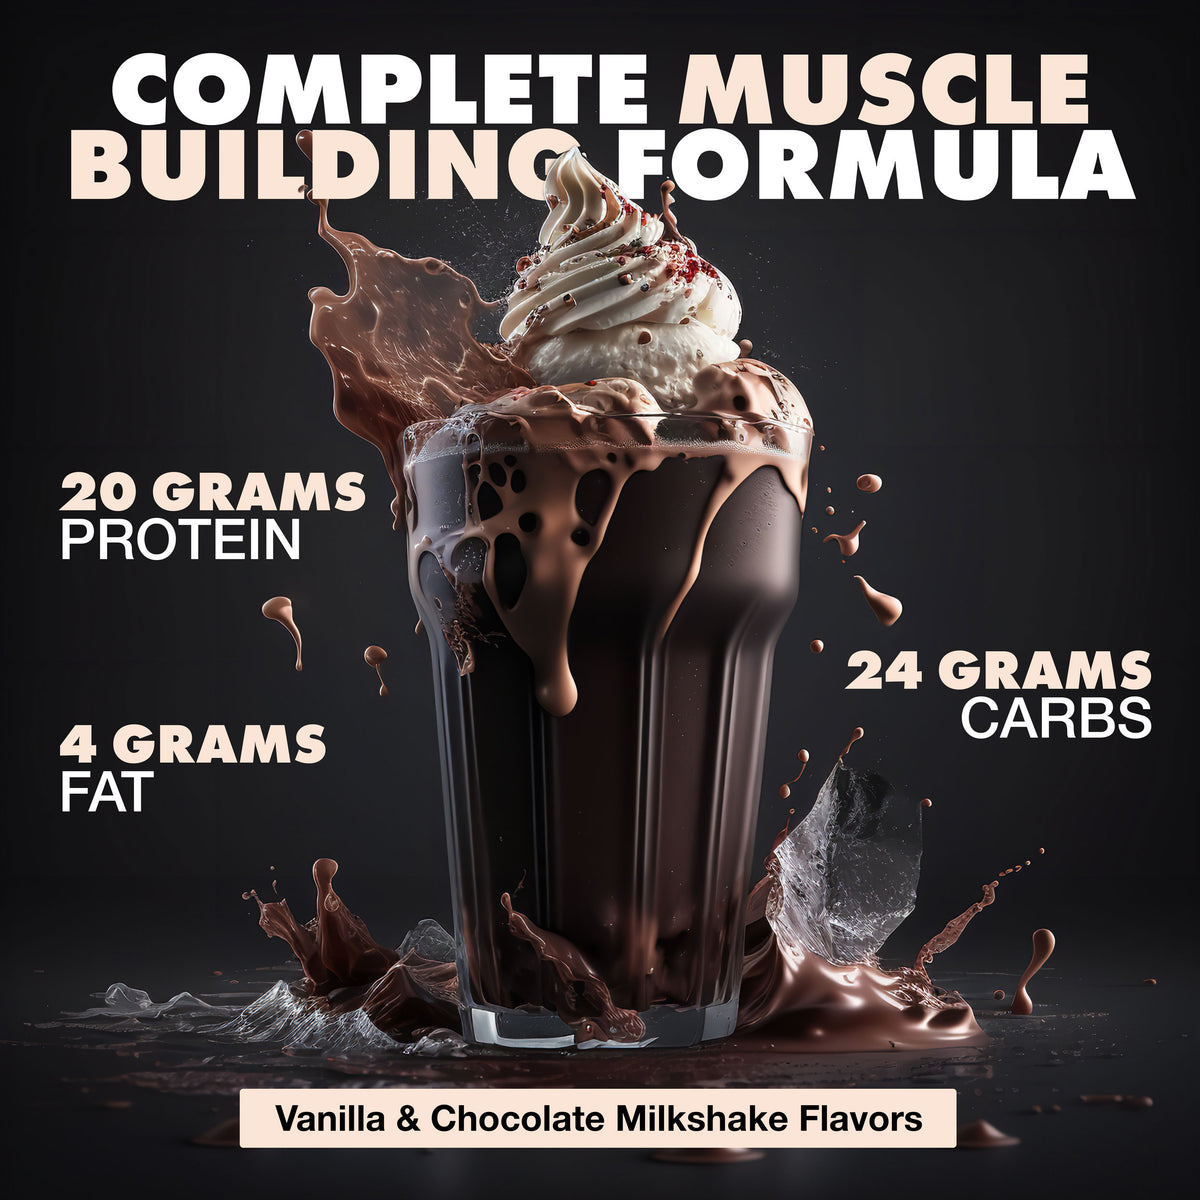 GAINS-100 Pre-Digested Recovery Formula (𝗕𝘂𝗶𝗹𝗱𝗶𝗻𝗴)